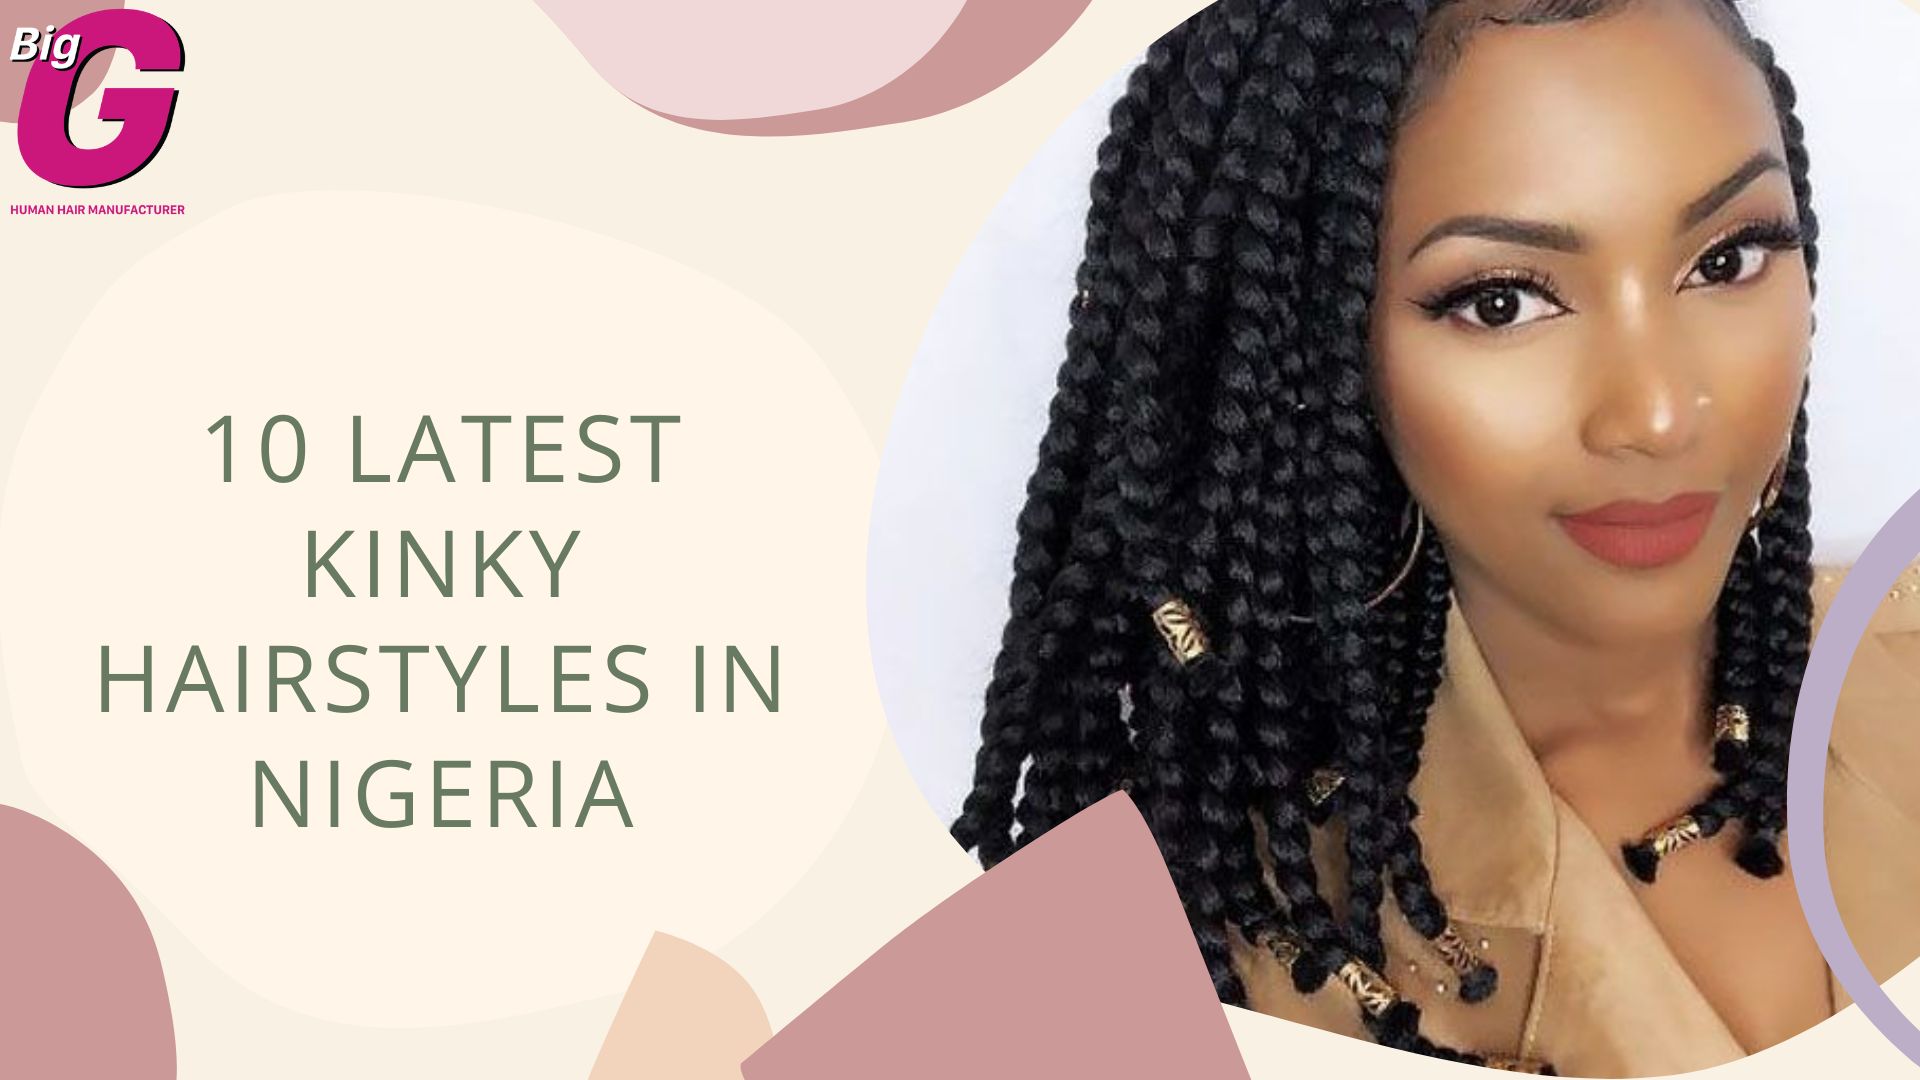 10 must-try latest kinky hairstyles in Nigeria